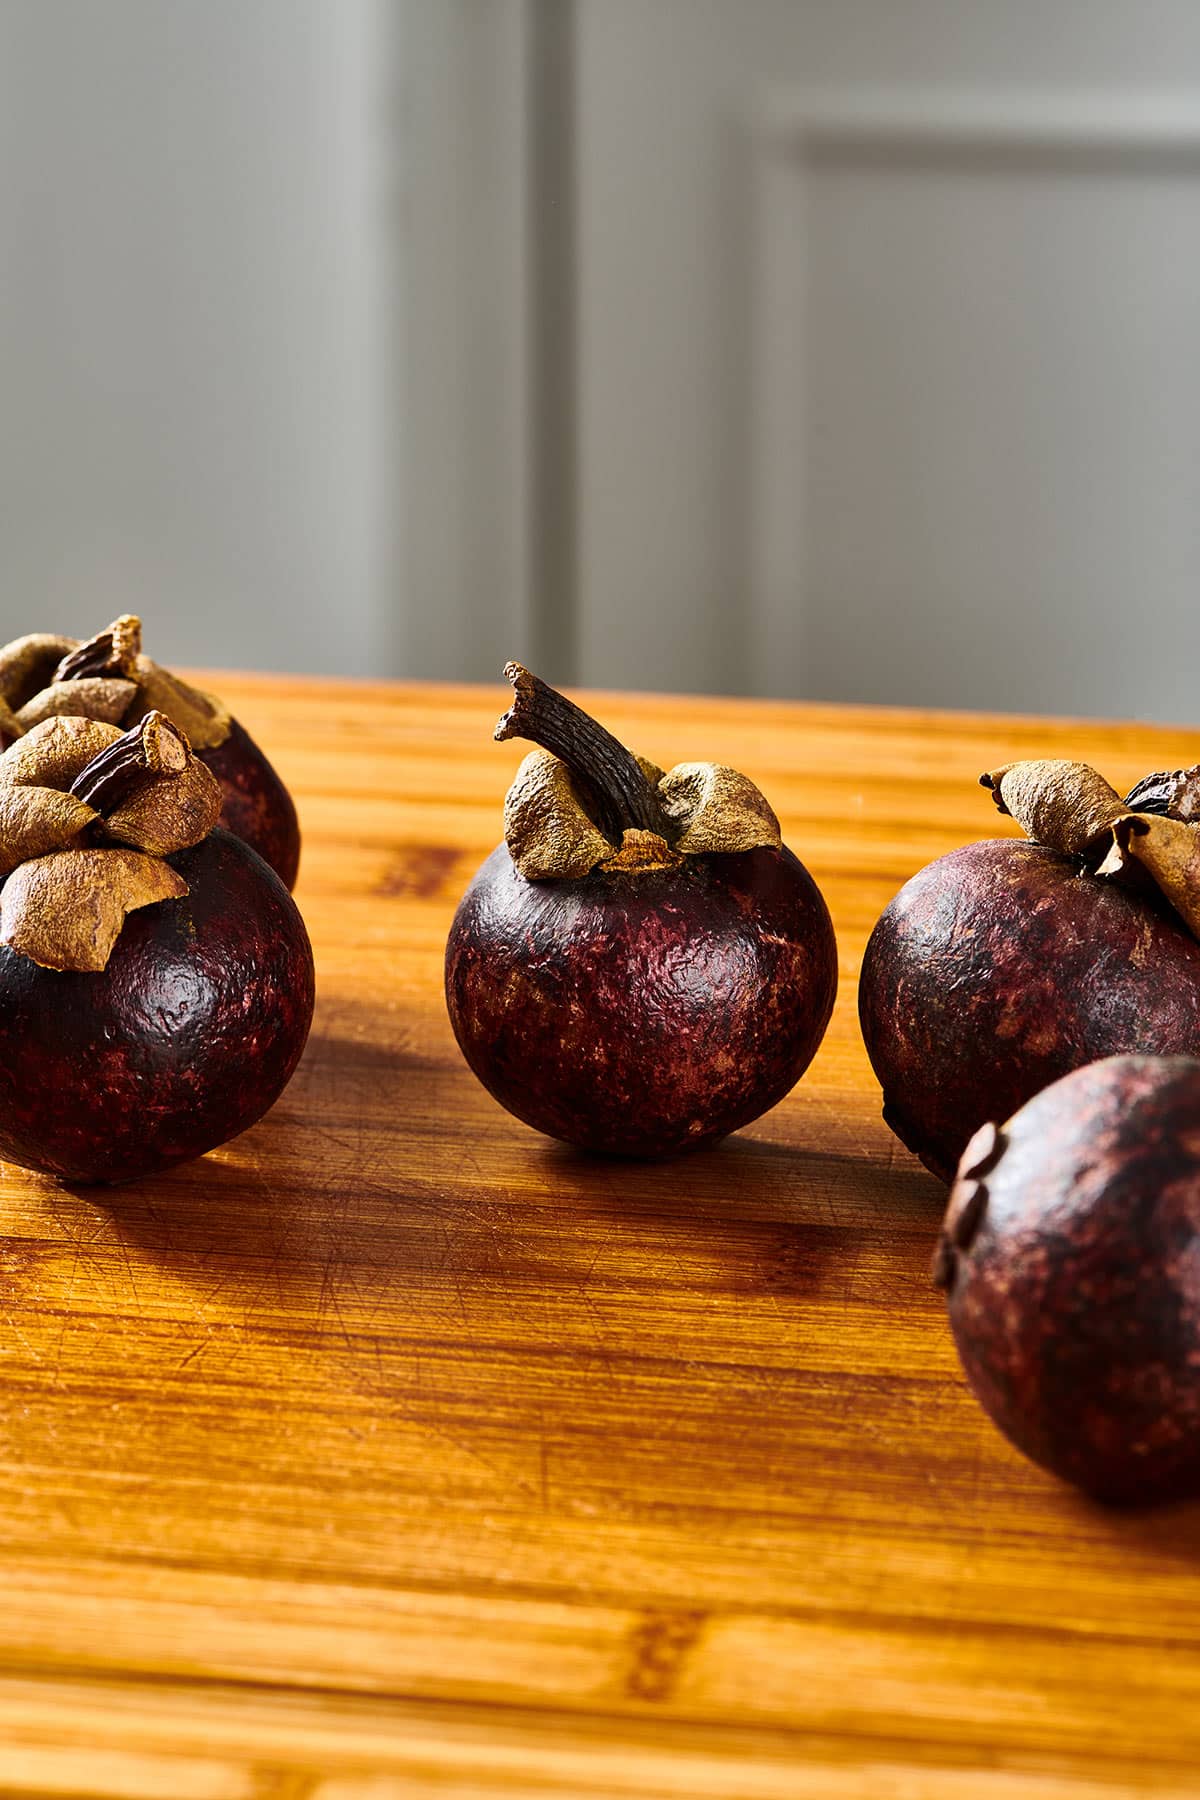 Group of fresh mangosteen fruits on wood cutting board in a kitchen.